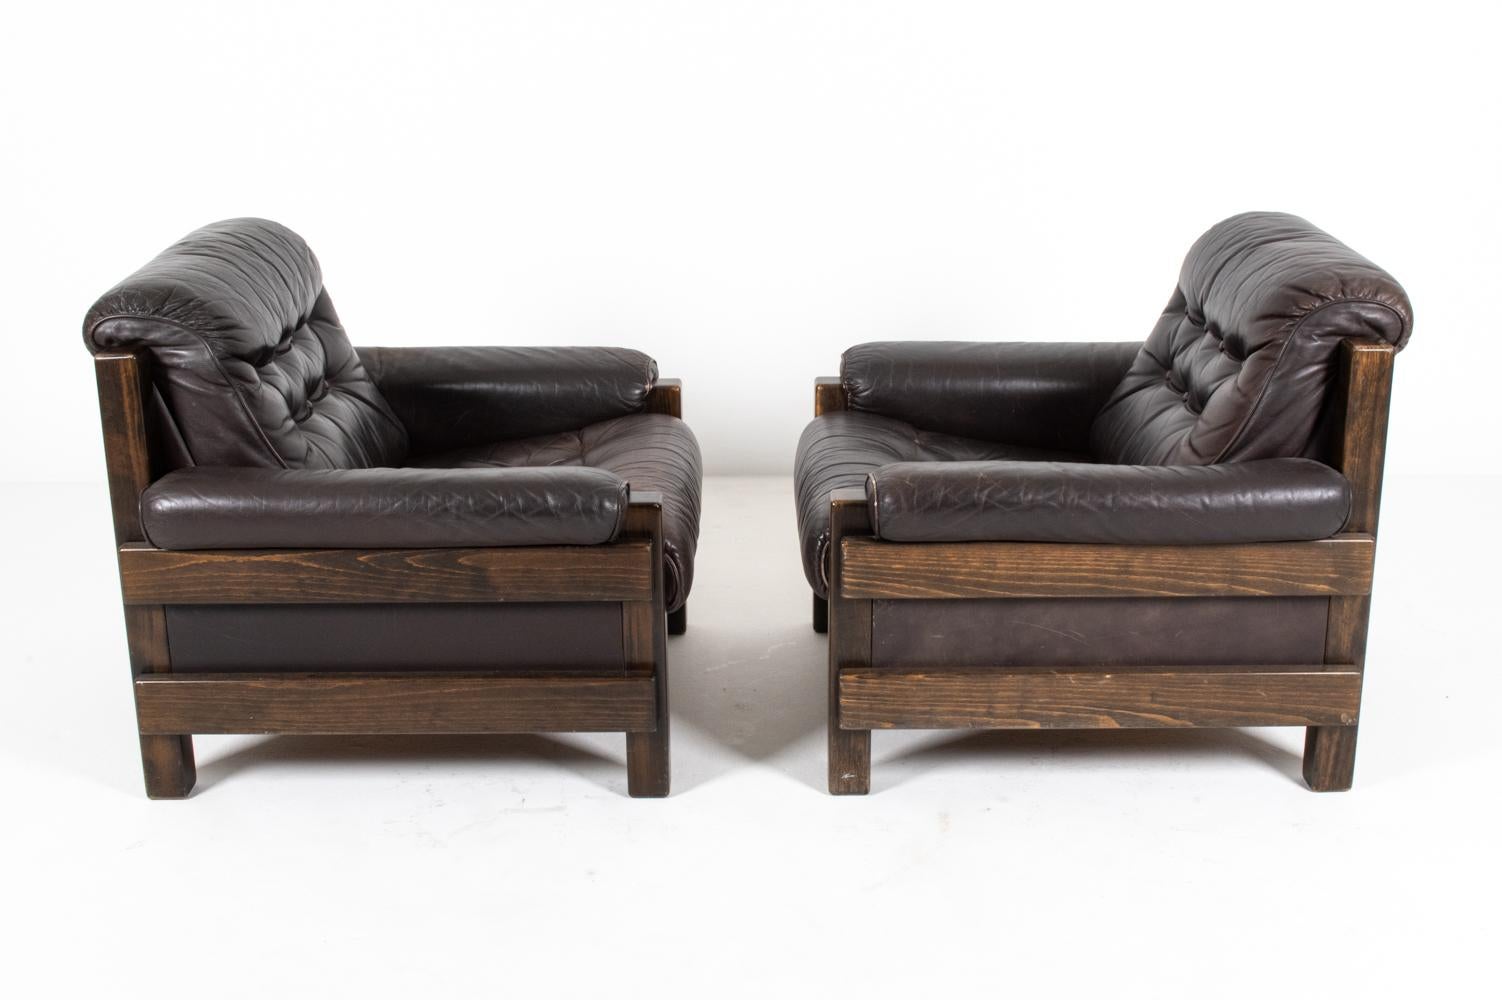 Pair of Swedish Mid-Century Tufted Leather Lounge Chairs by Ikea, 1970's For Sale 7